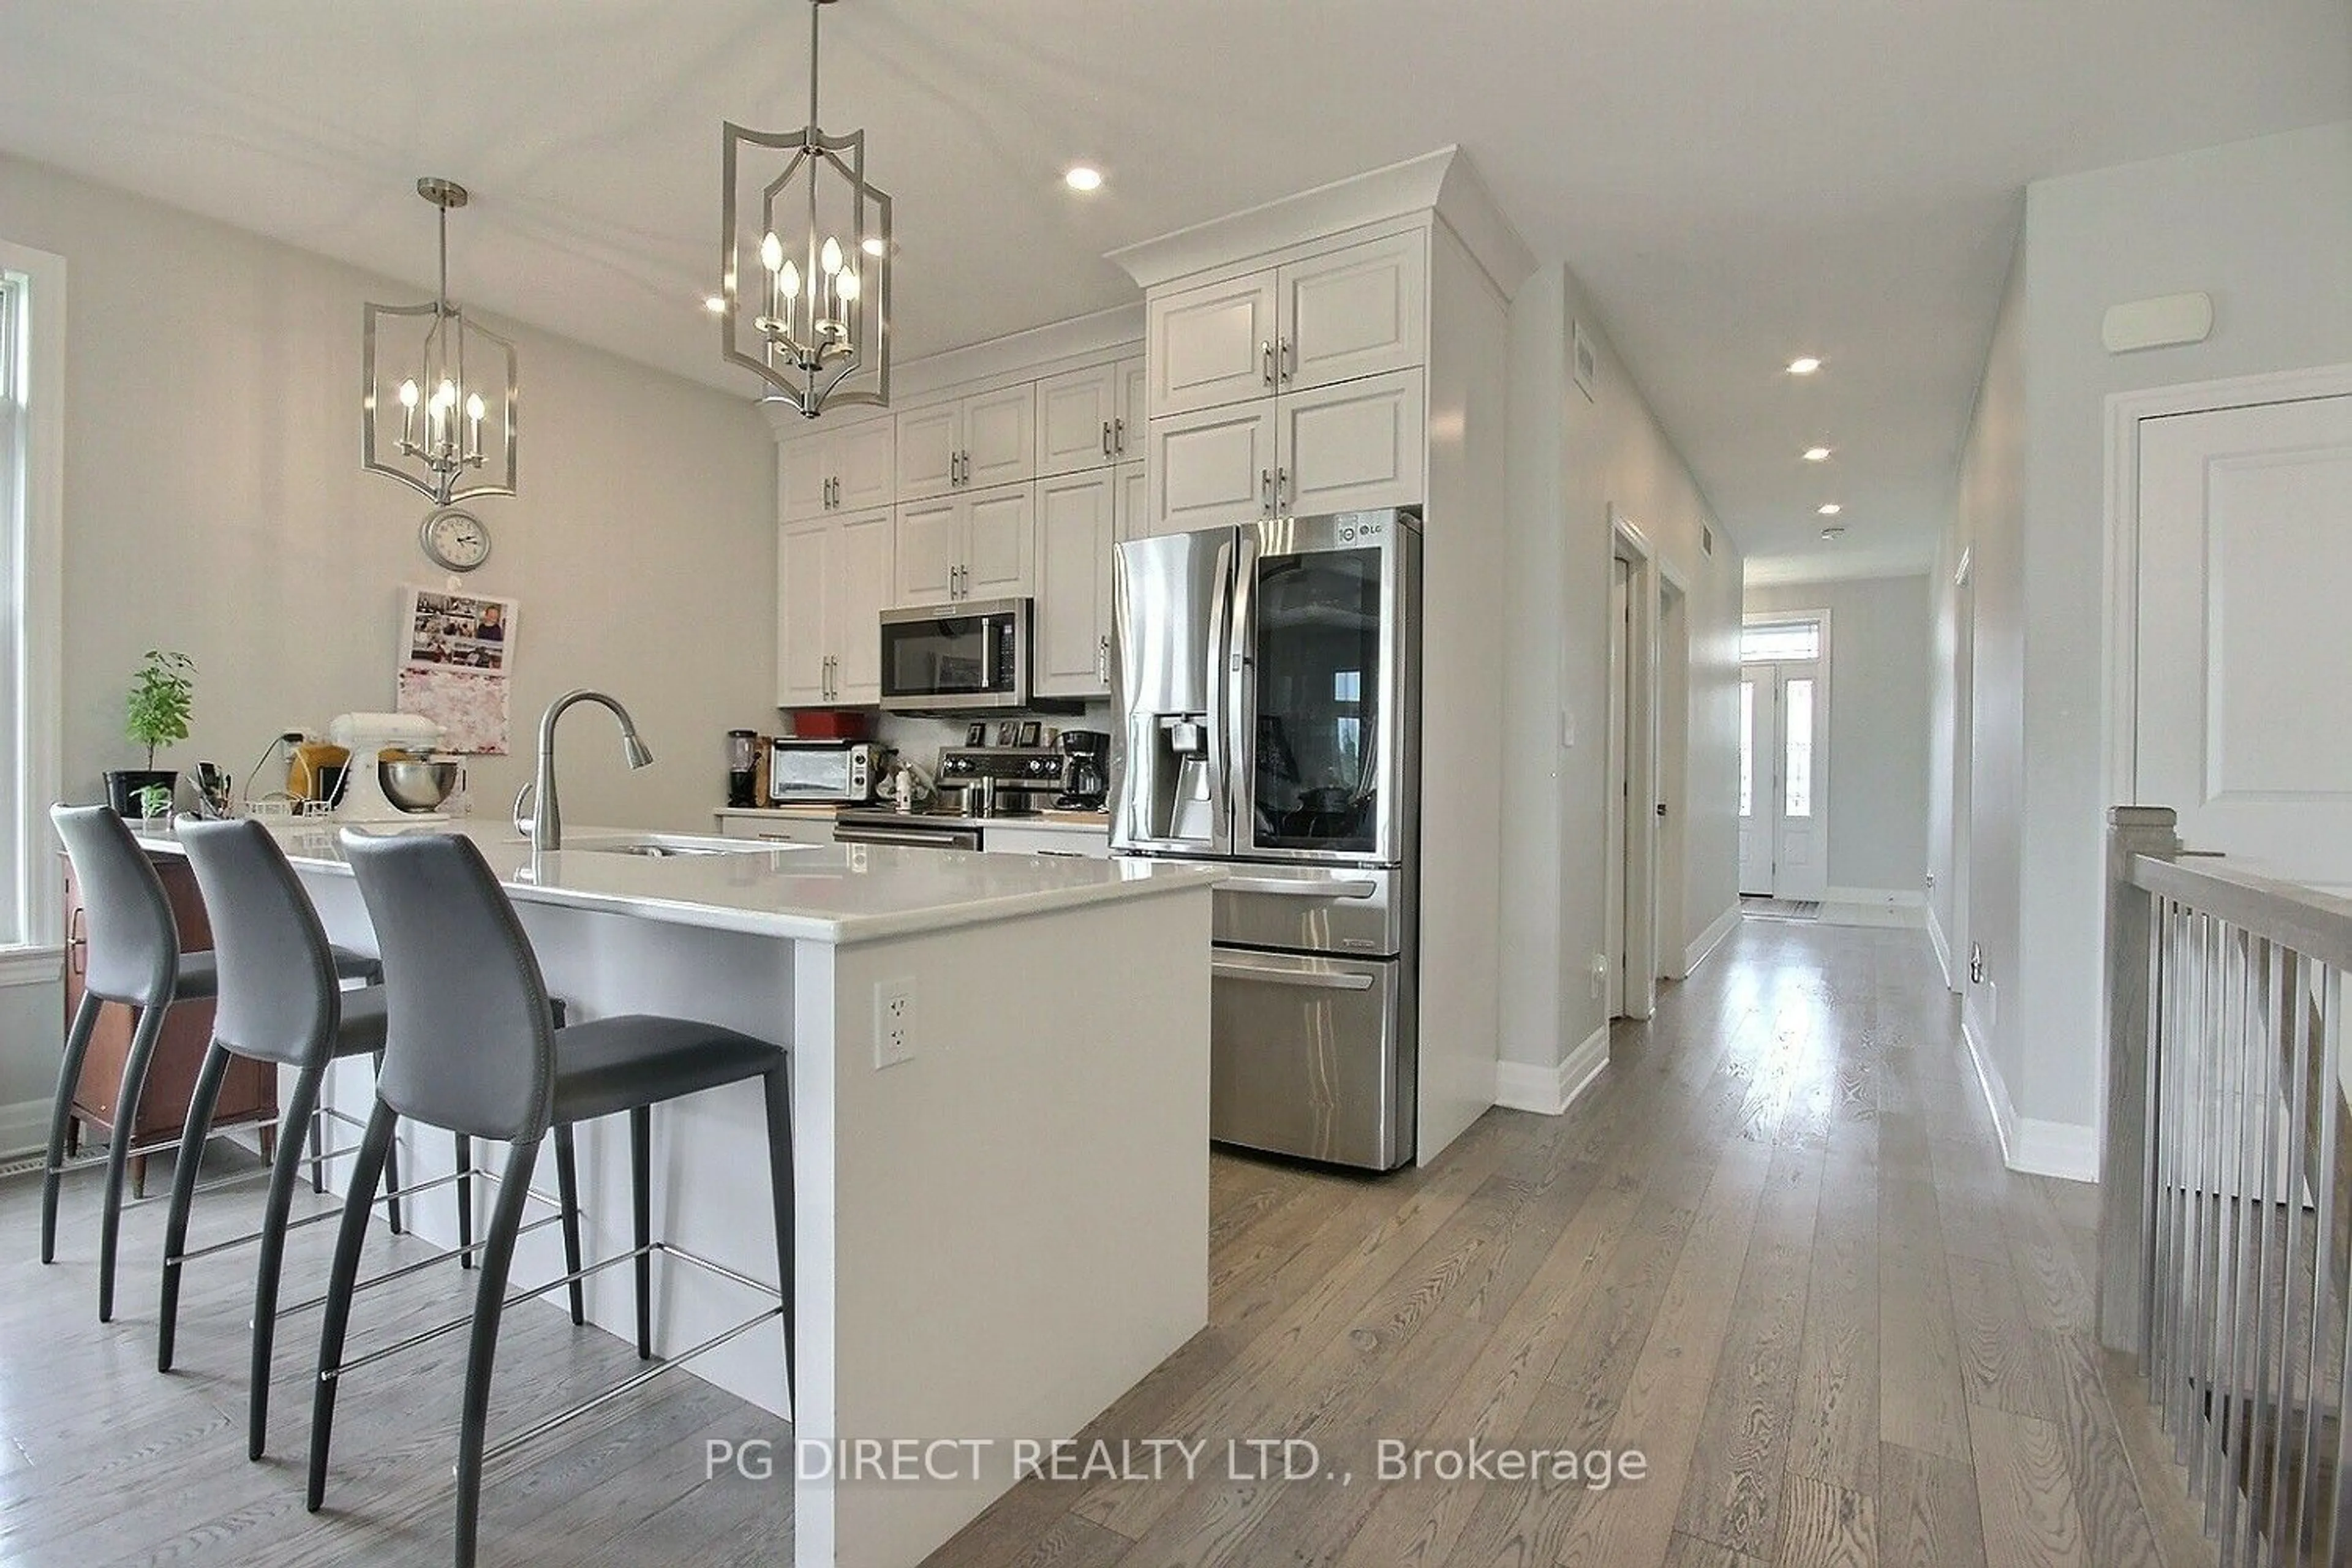 Contemporary kitchen for 80 Wims Way, Belleville Ontario K8N 4Z5